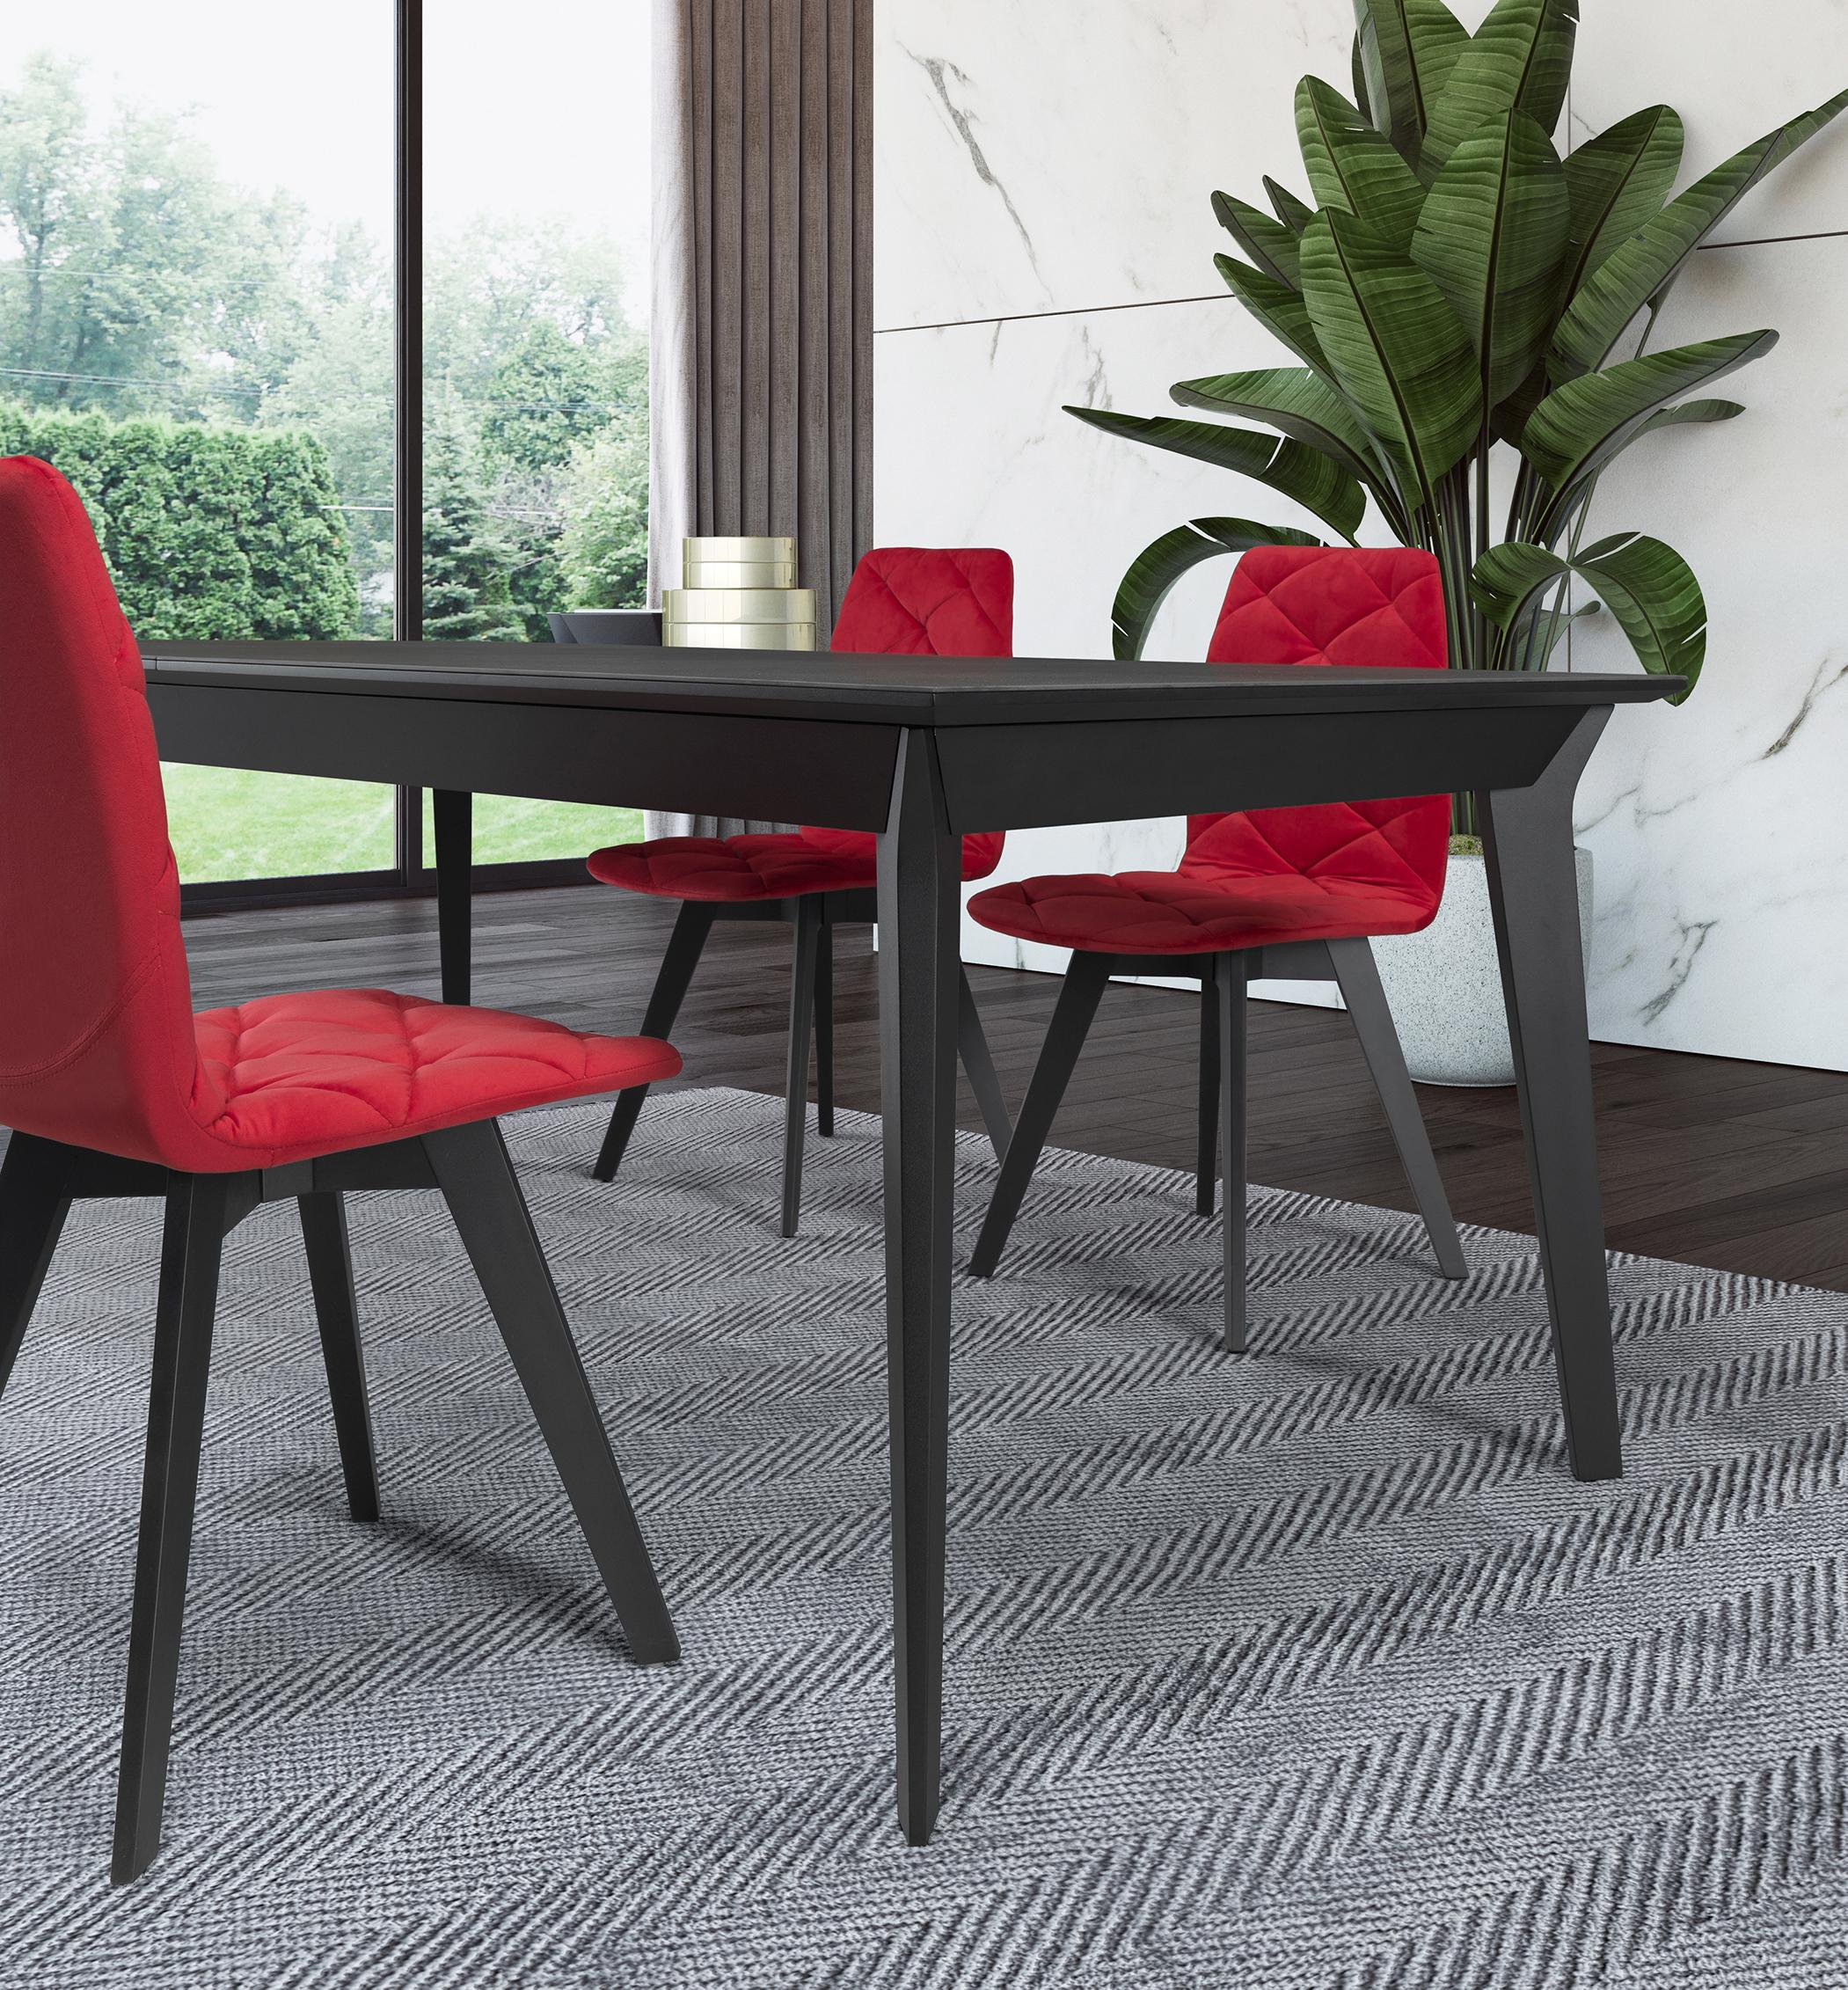 Inspired by the tattoo designs of the New Zealand people, the Maori extendable dining table, which is 100% produced in Portugal (Europe), presents an affordable yet quality-assured approach to practical extendable tables. 

Designed by the French